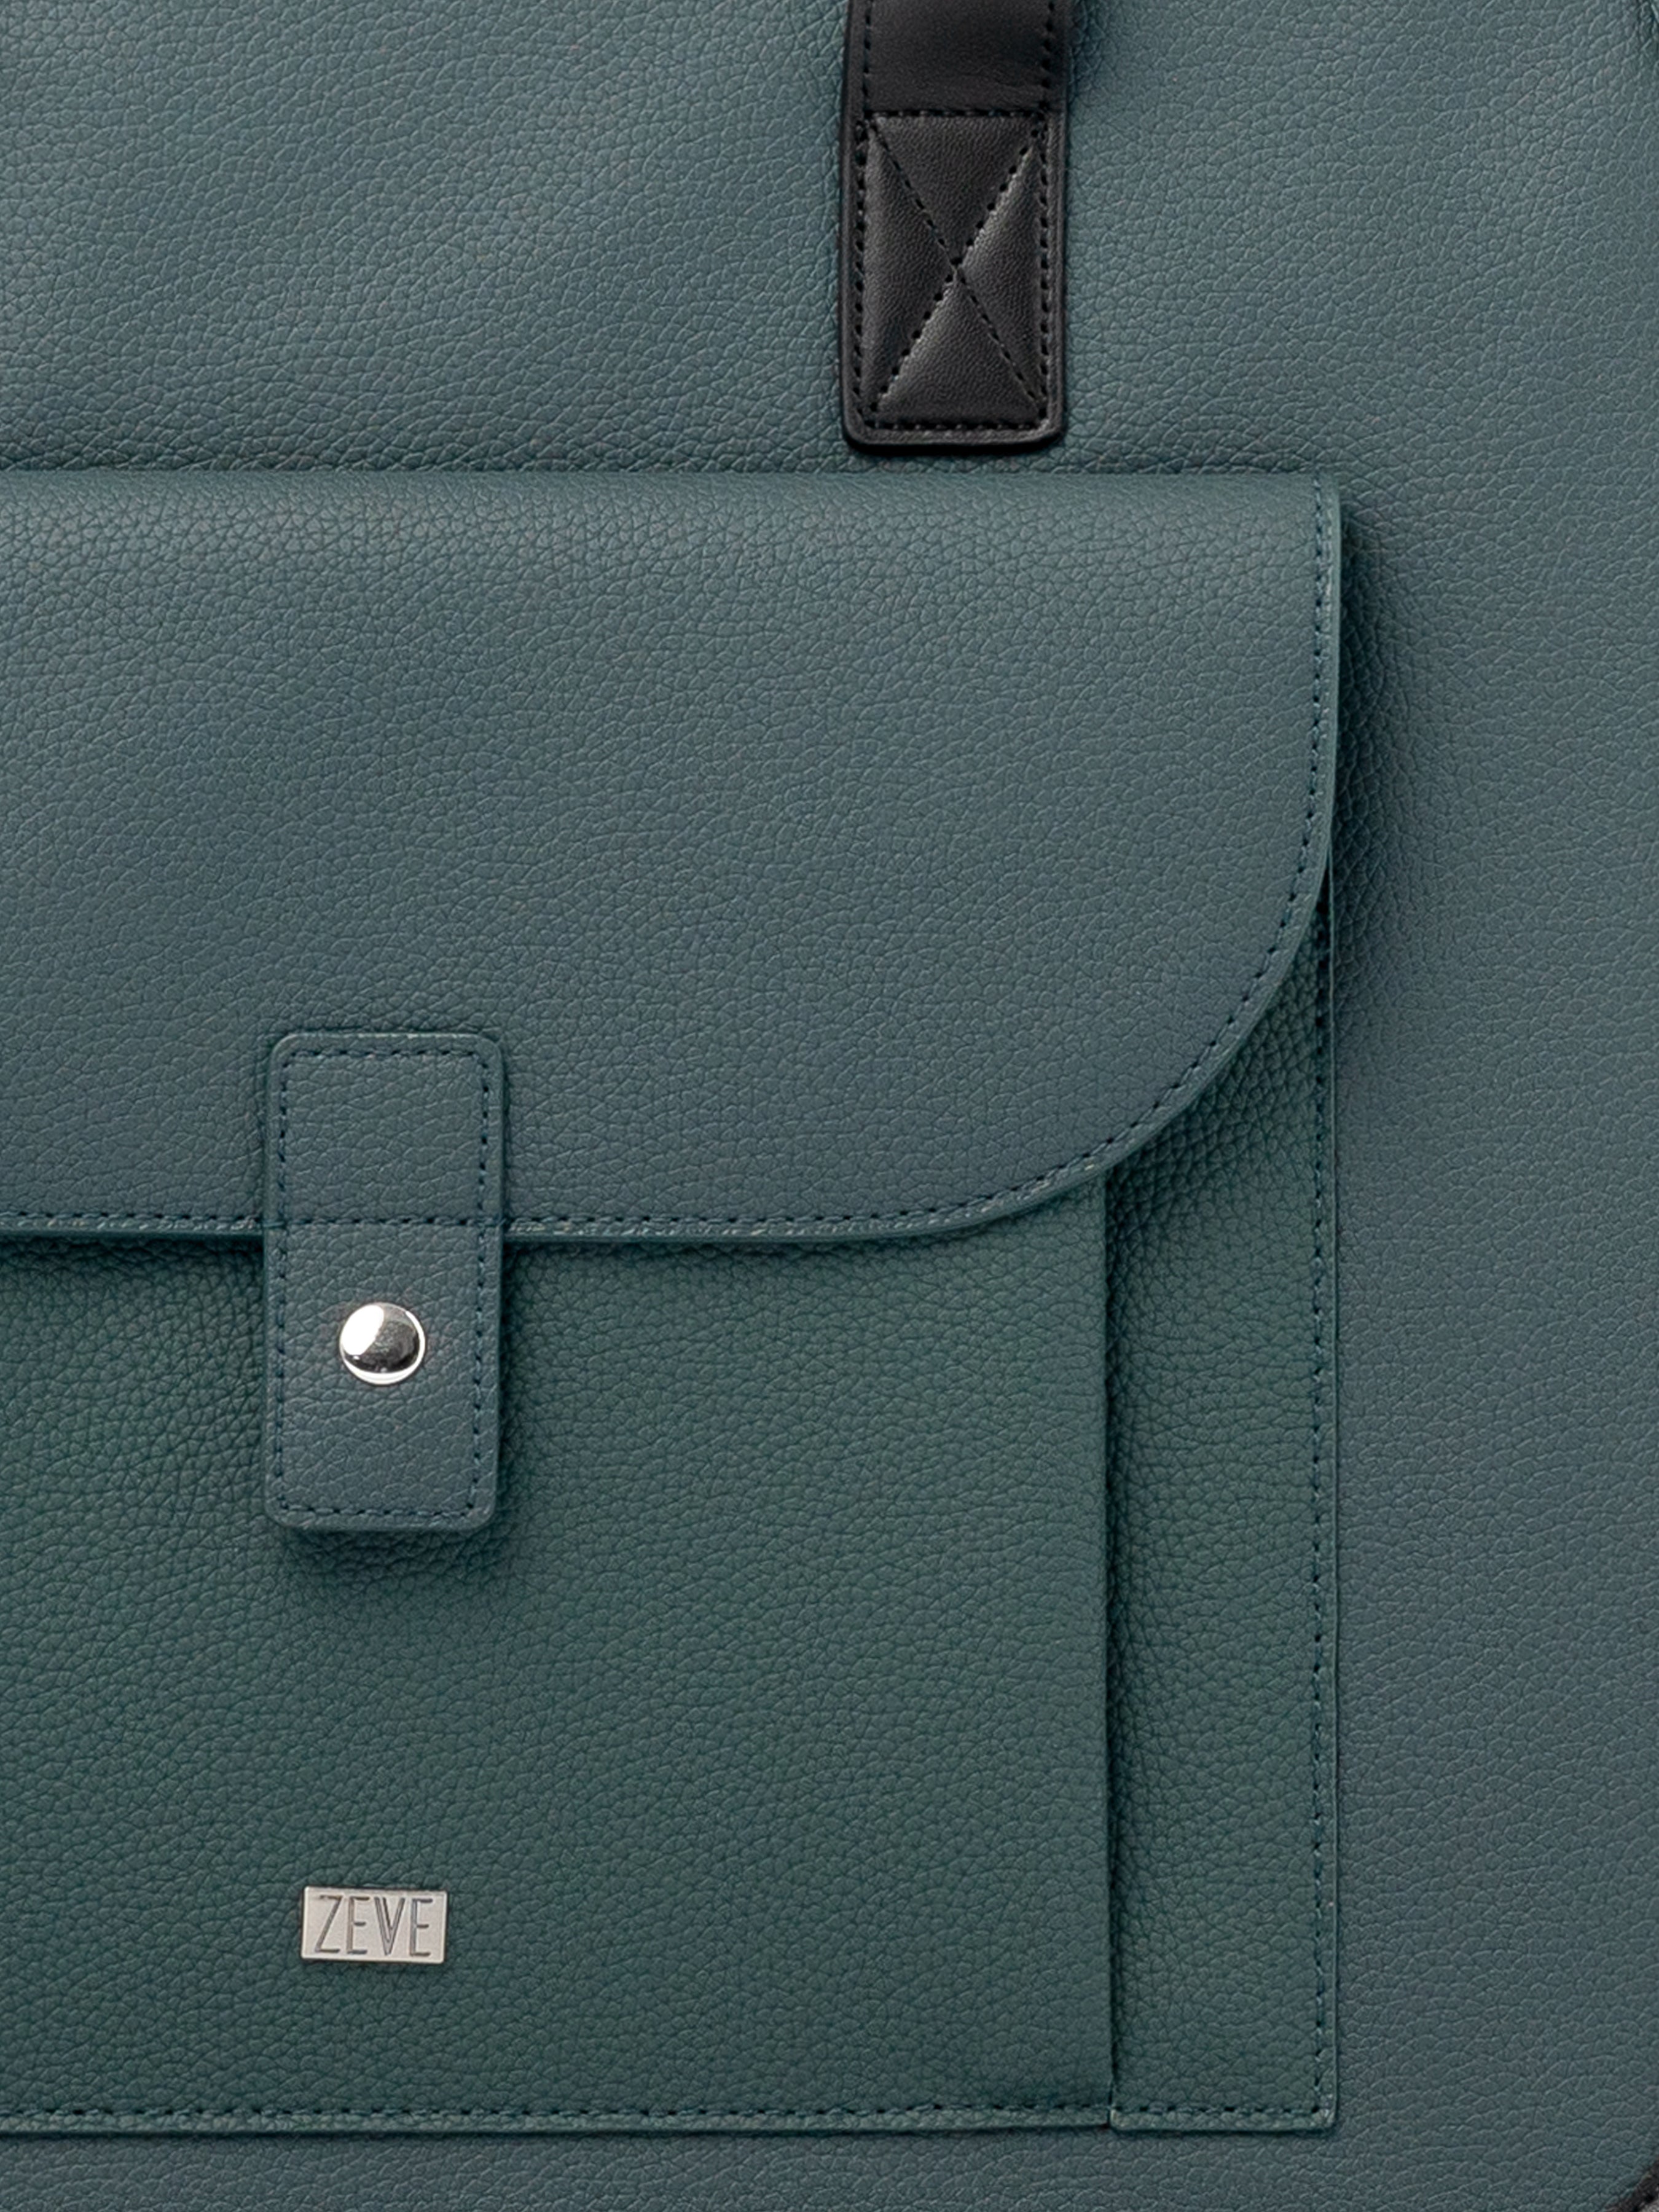 Ares Tote Bag With Zipper - Dark Green